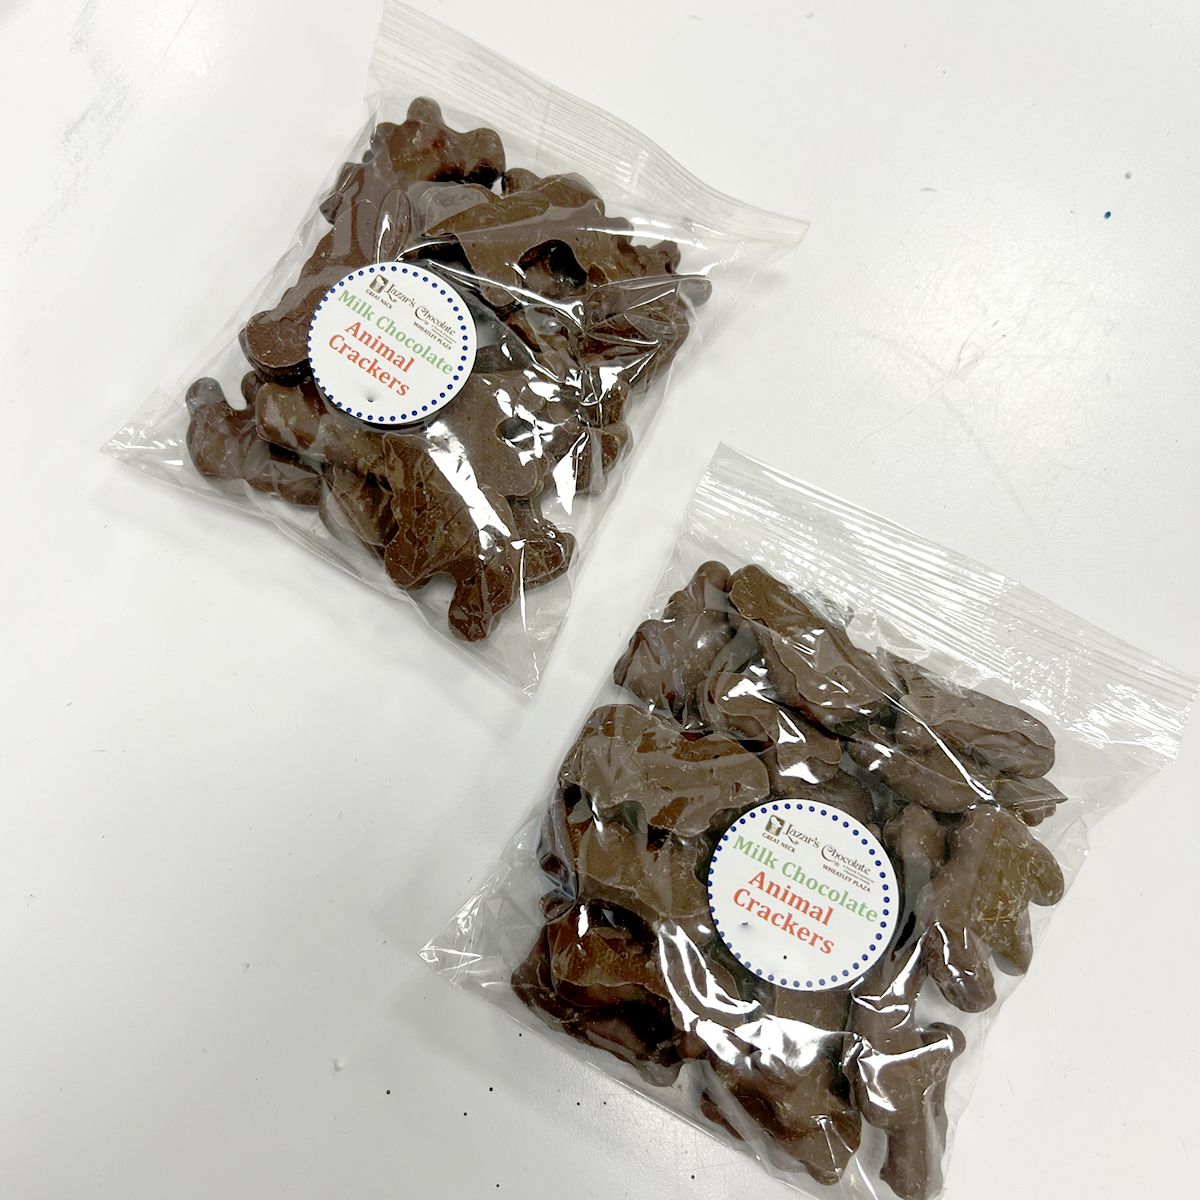 Chocolate Covered Animal Crackers - Snack Pack